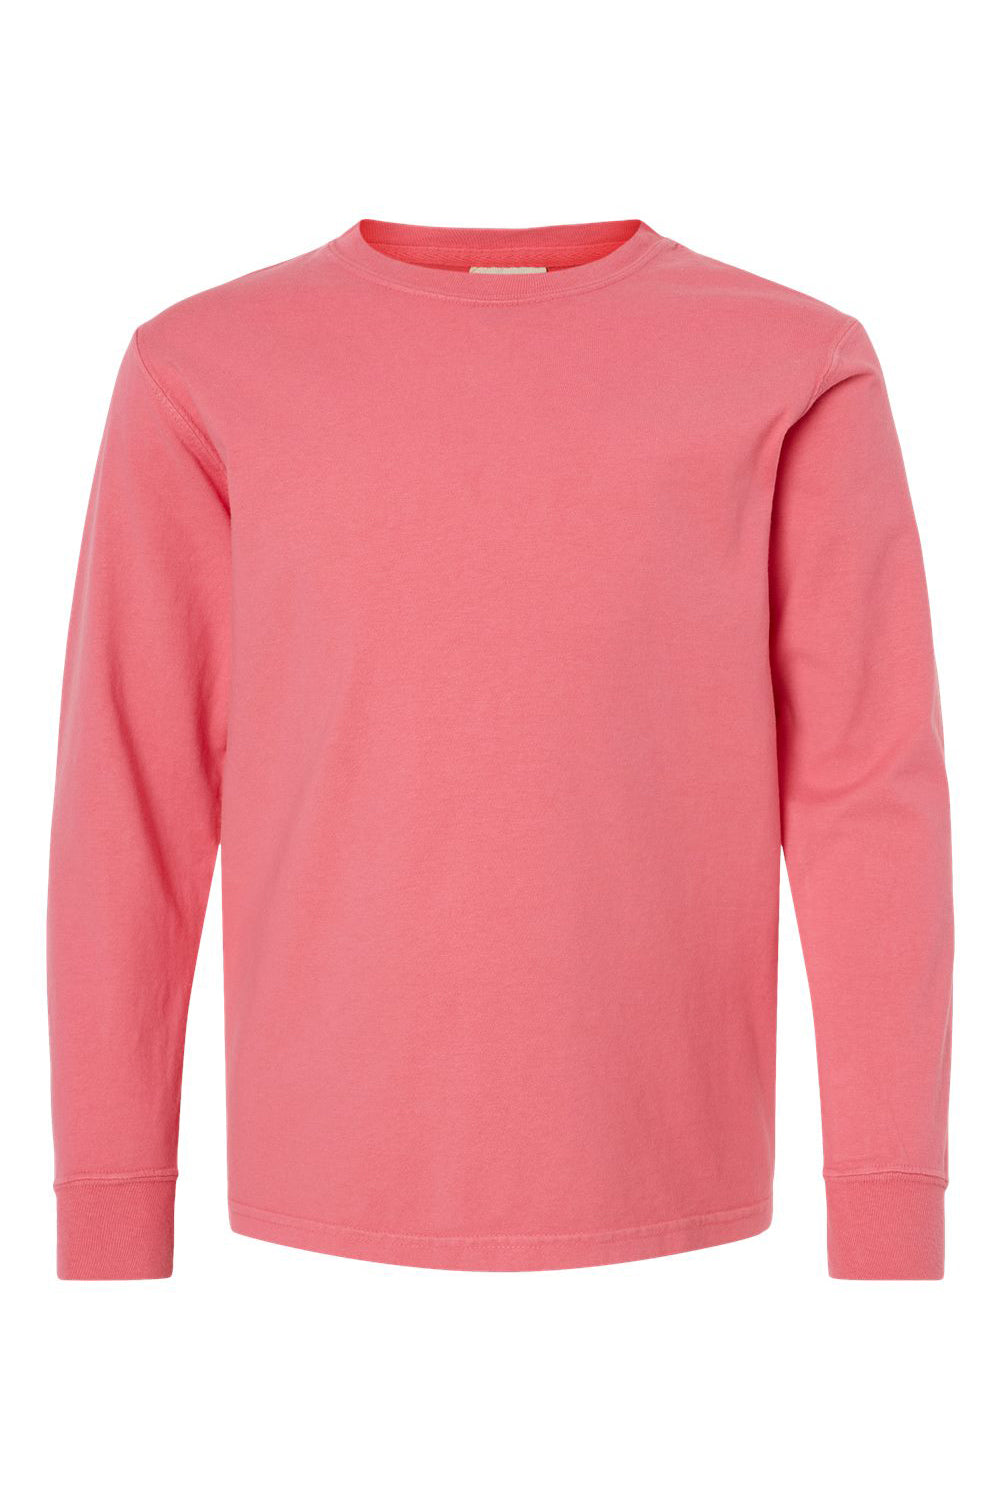 ComfortWash By Hanes GDH275 Youth Garment Dyed Long Sleeve Crewneck T-Shirt Coral Craze Flat Front